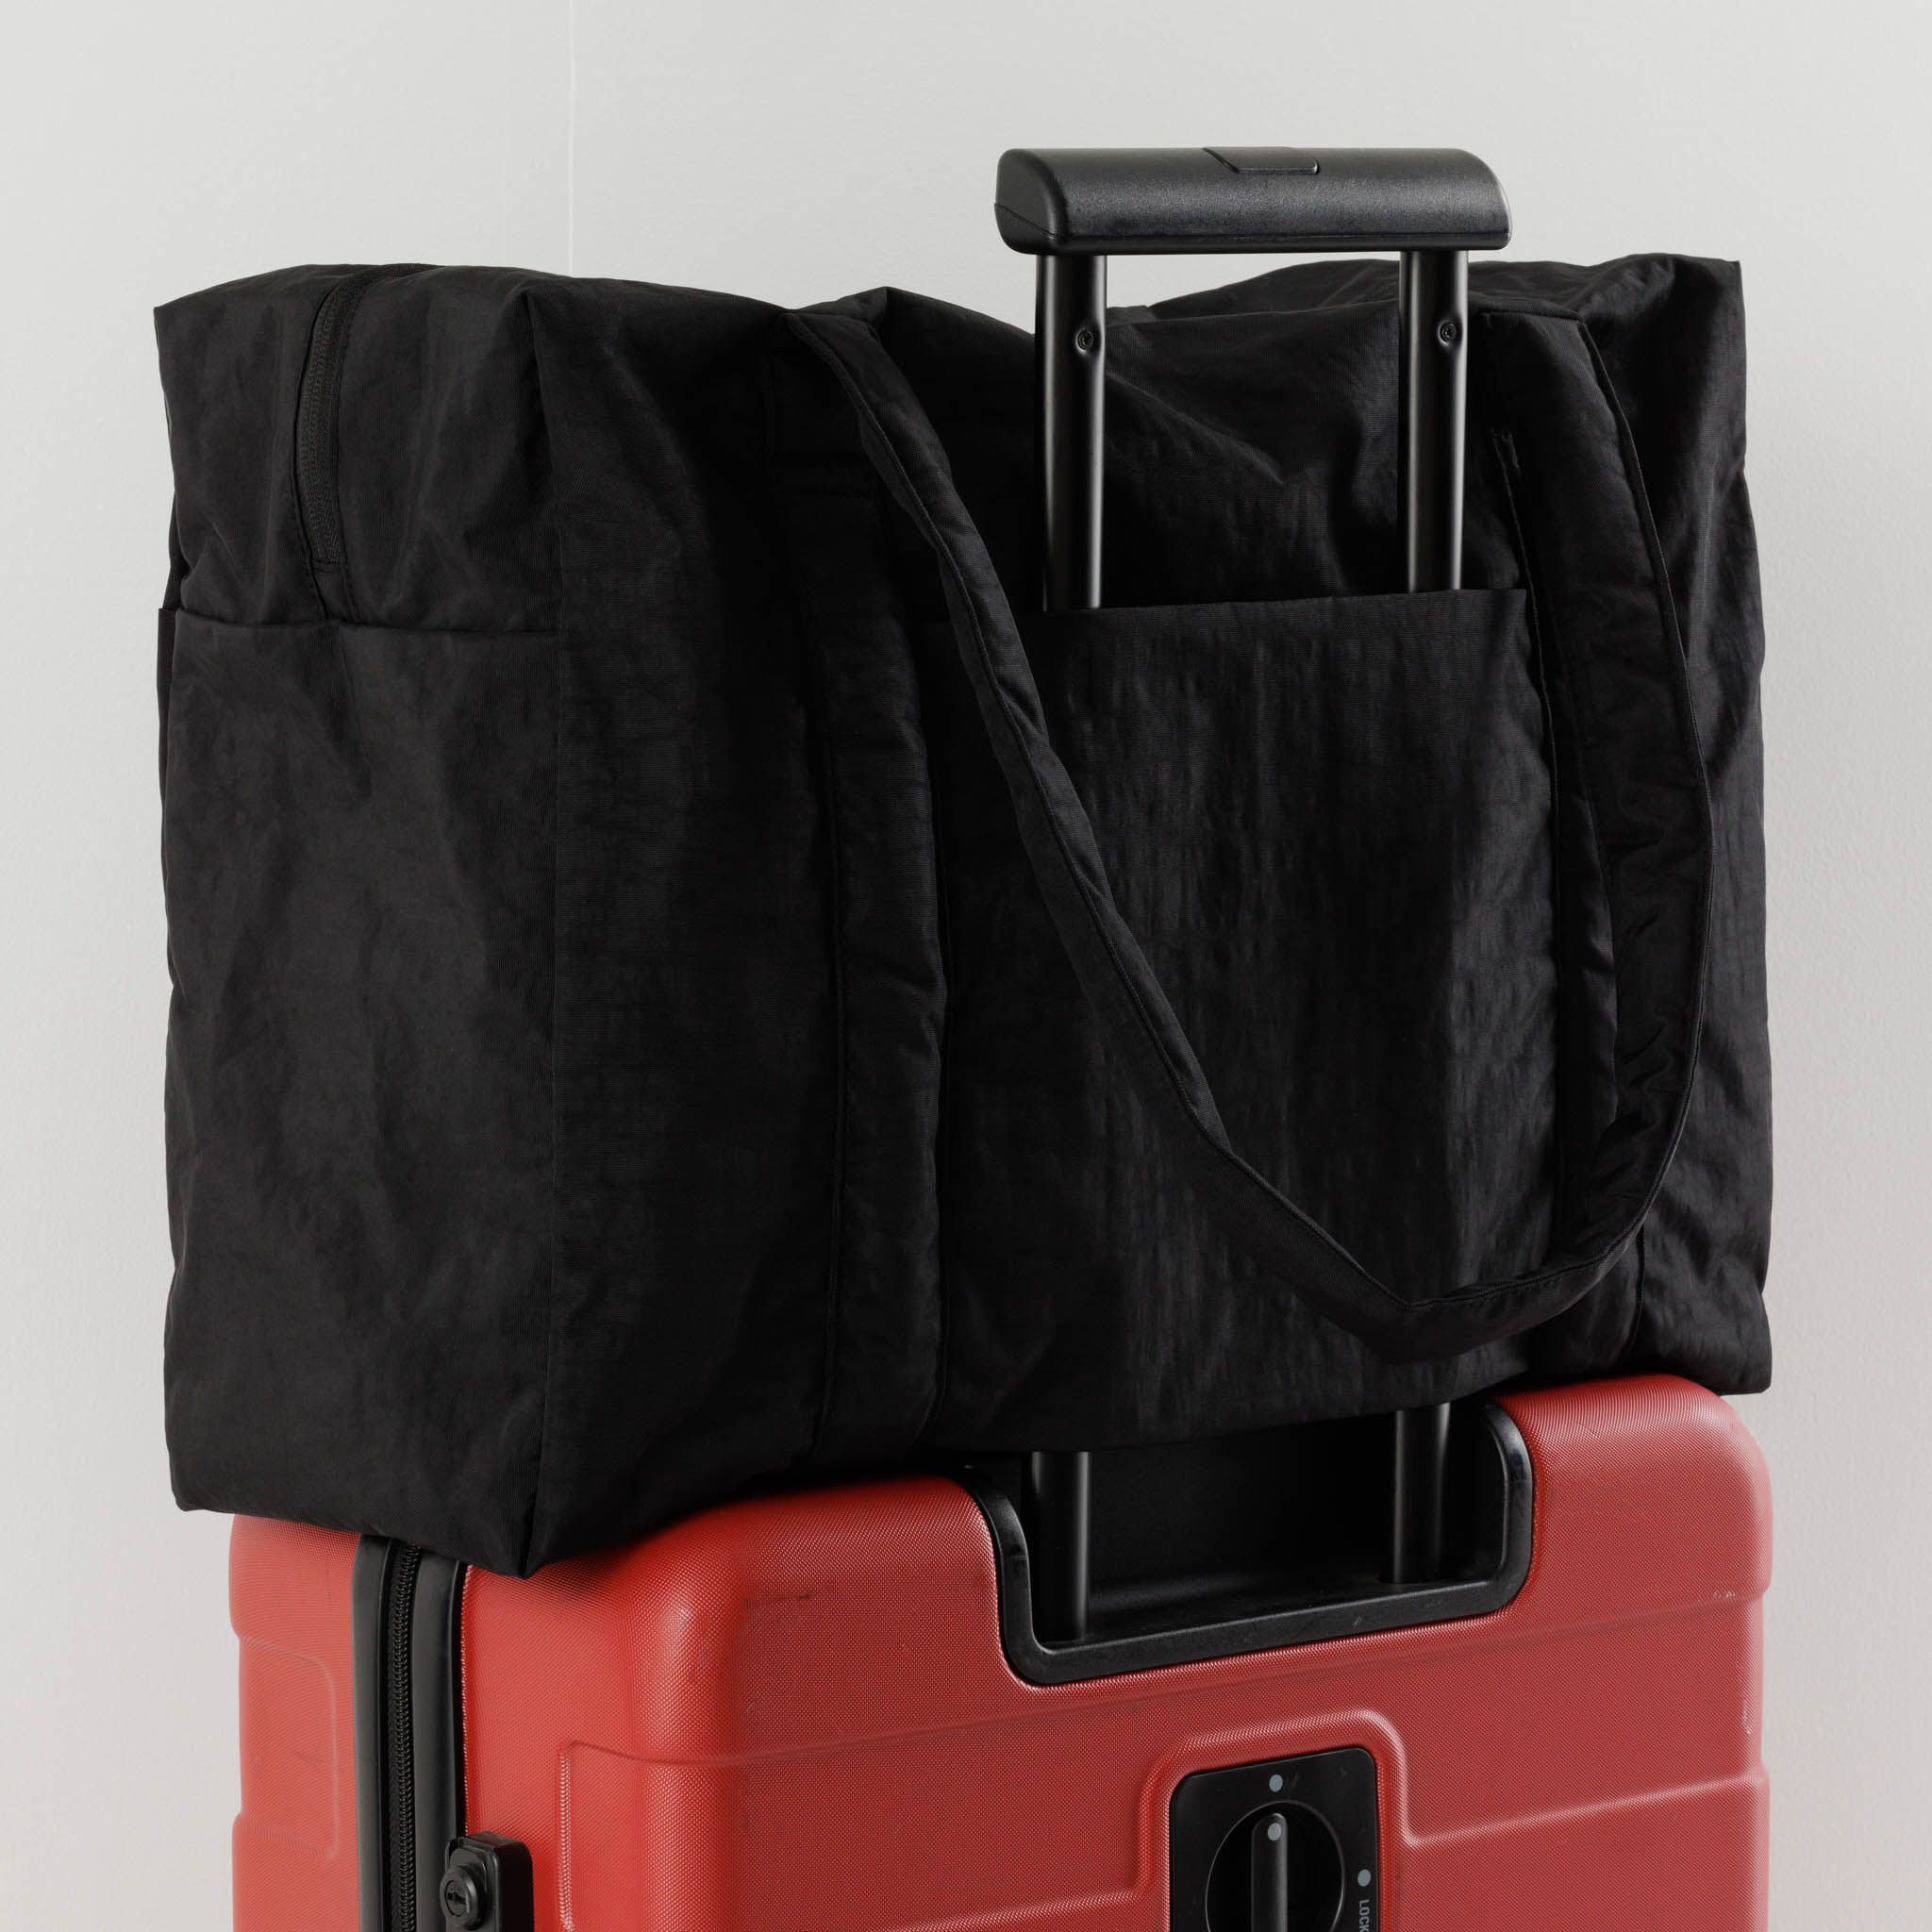 A black nylon bag sits on top of a suitcase